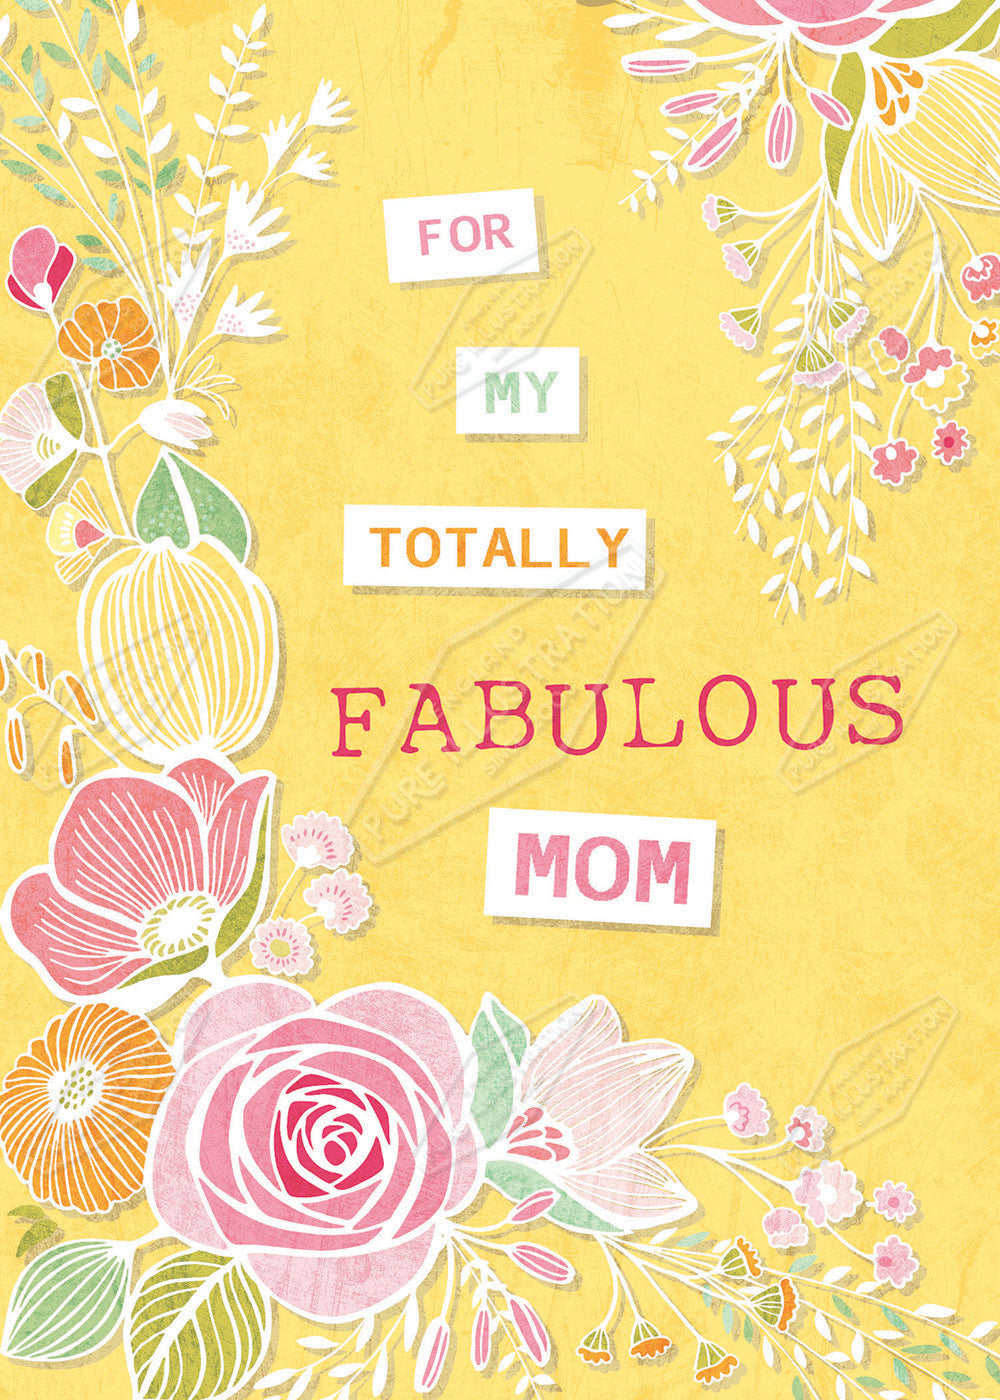 Mother's Day / Birthday Design by Gill Eggleston for Pure Art Licensing Agency & Surface Design Studio